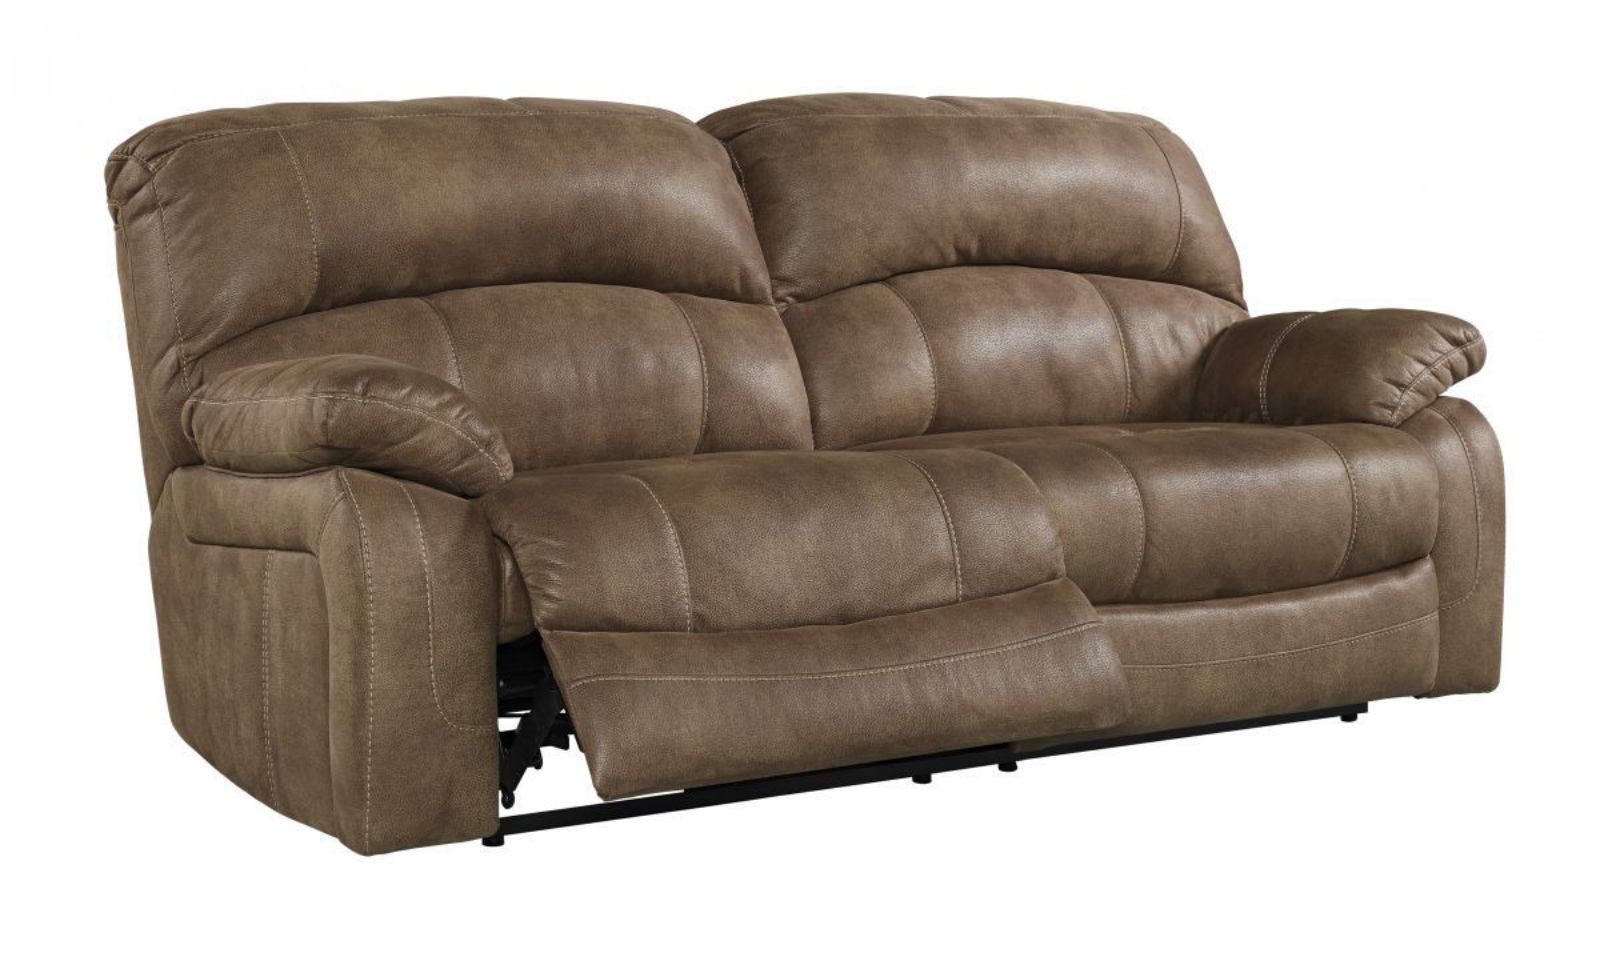 Picture of Zavier Reclining Power Sofa